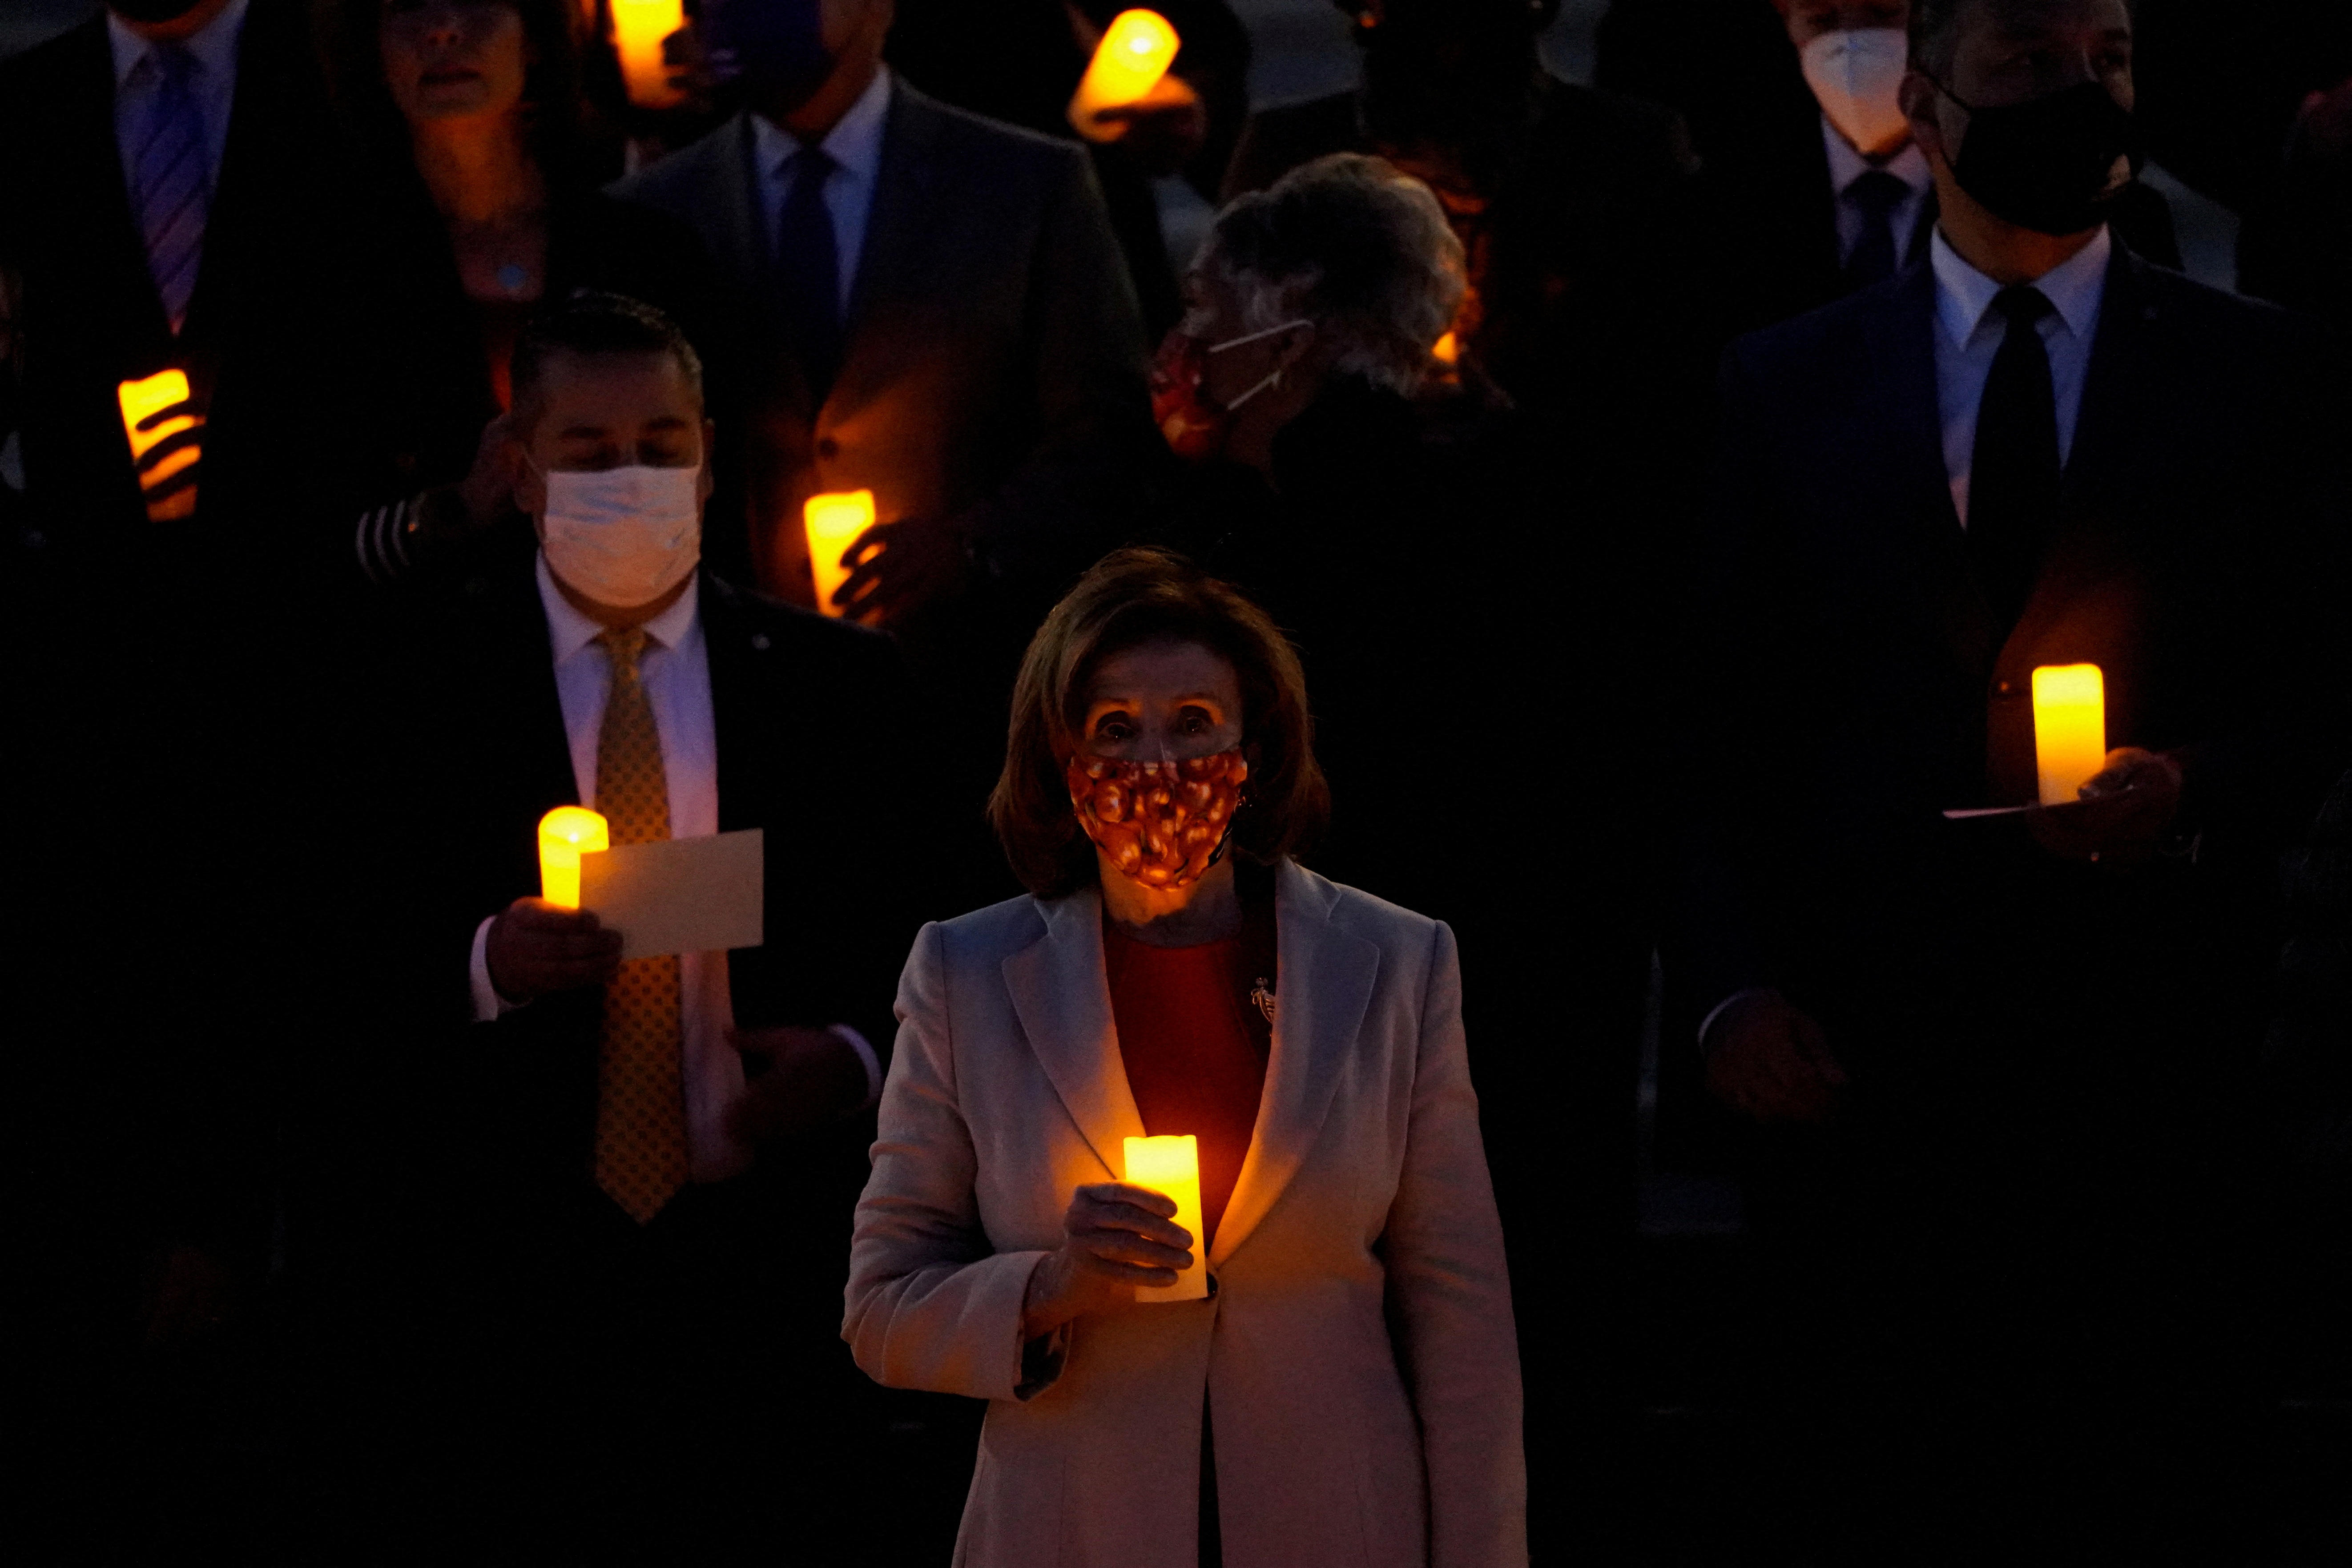 Bipartisan members of the House and Senate hold a moment of silence for the more than 800,000 American lives lost to COVID-19 outside the U.S. Capitol building in Washington